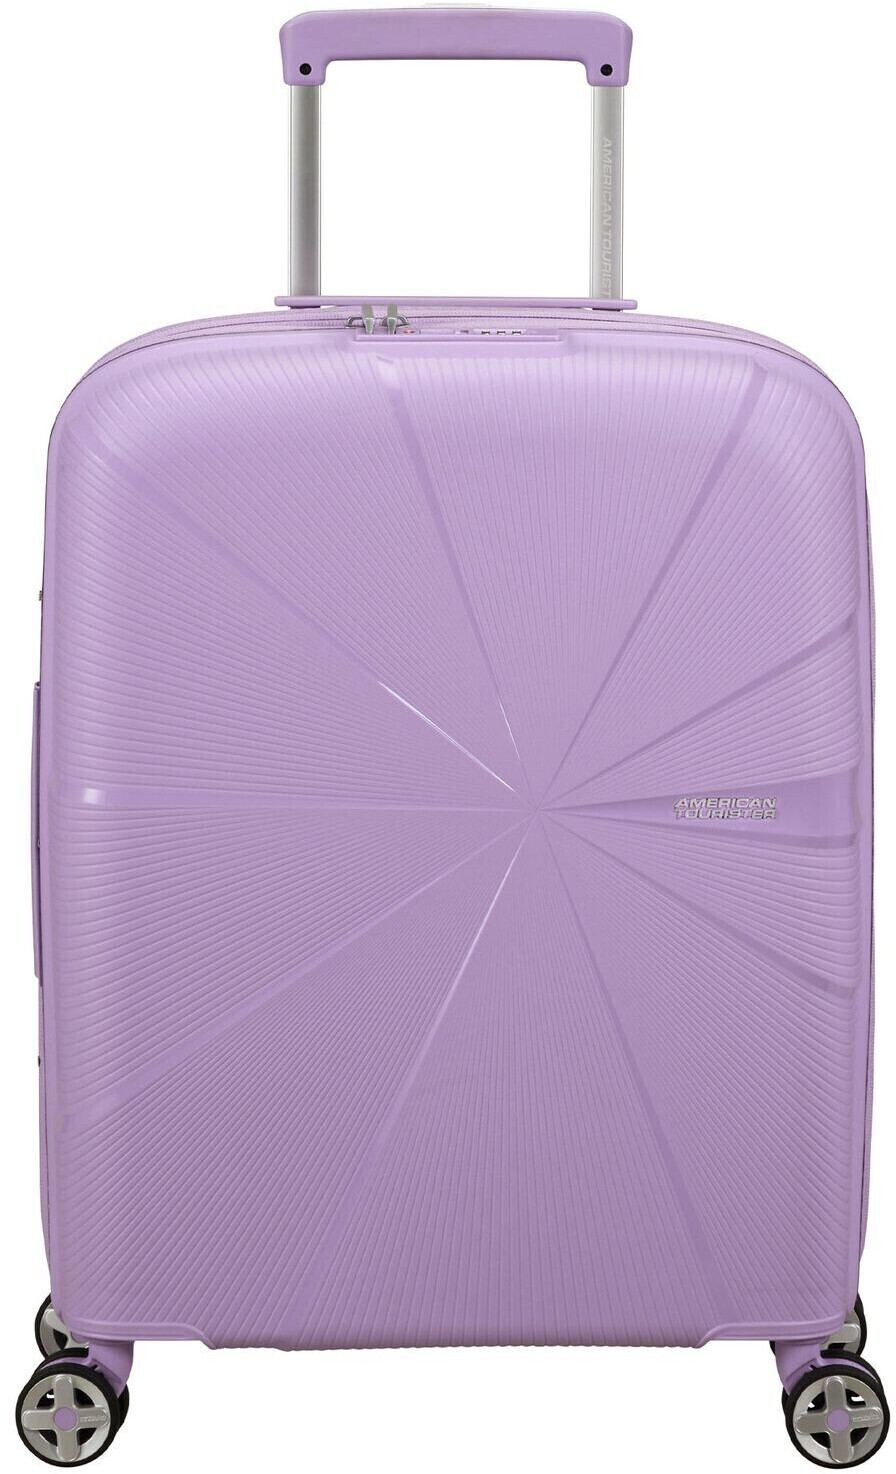 Photos - Luggage American Tourister Starvibe 4-Wheel-Trolley 55 cm digit 